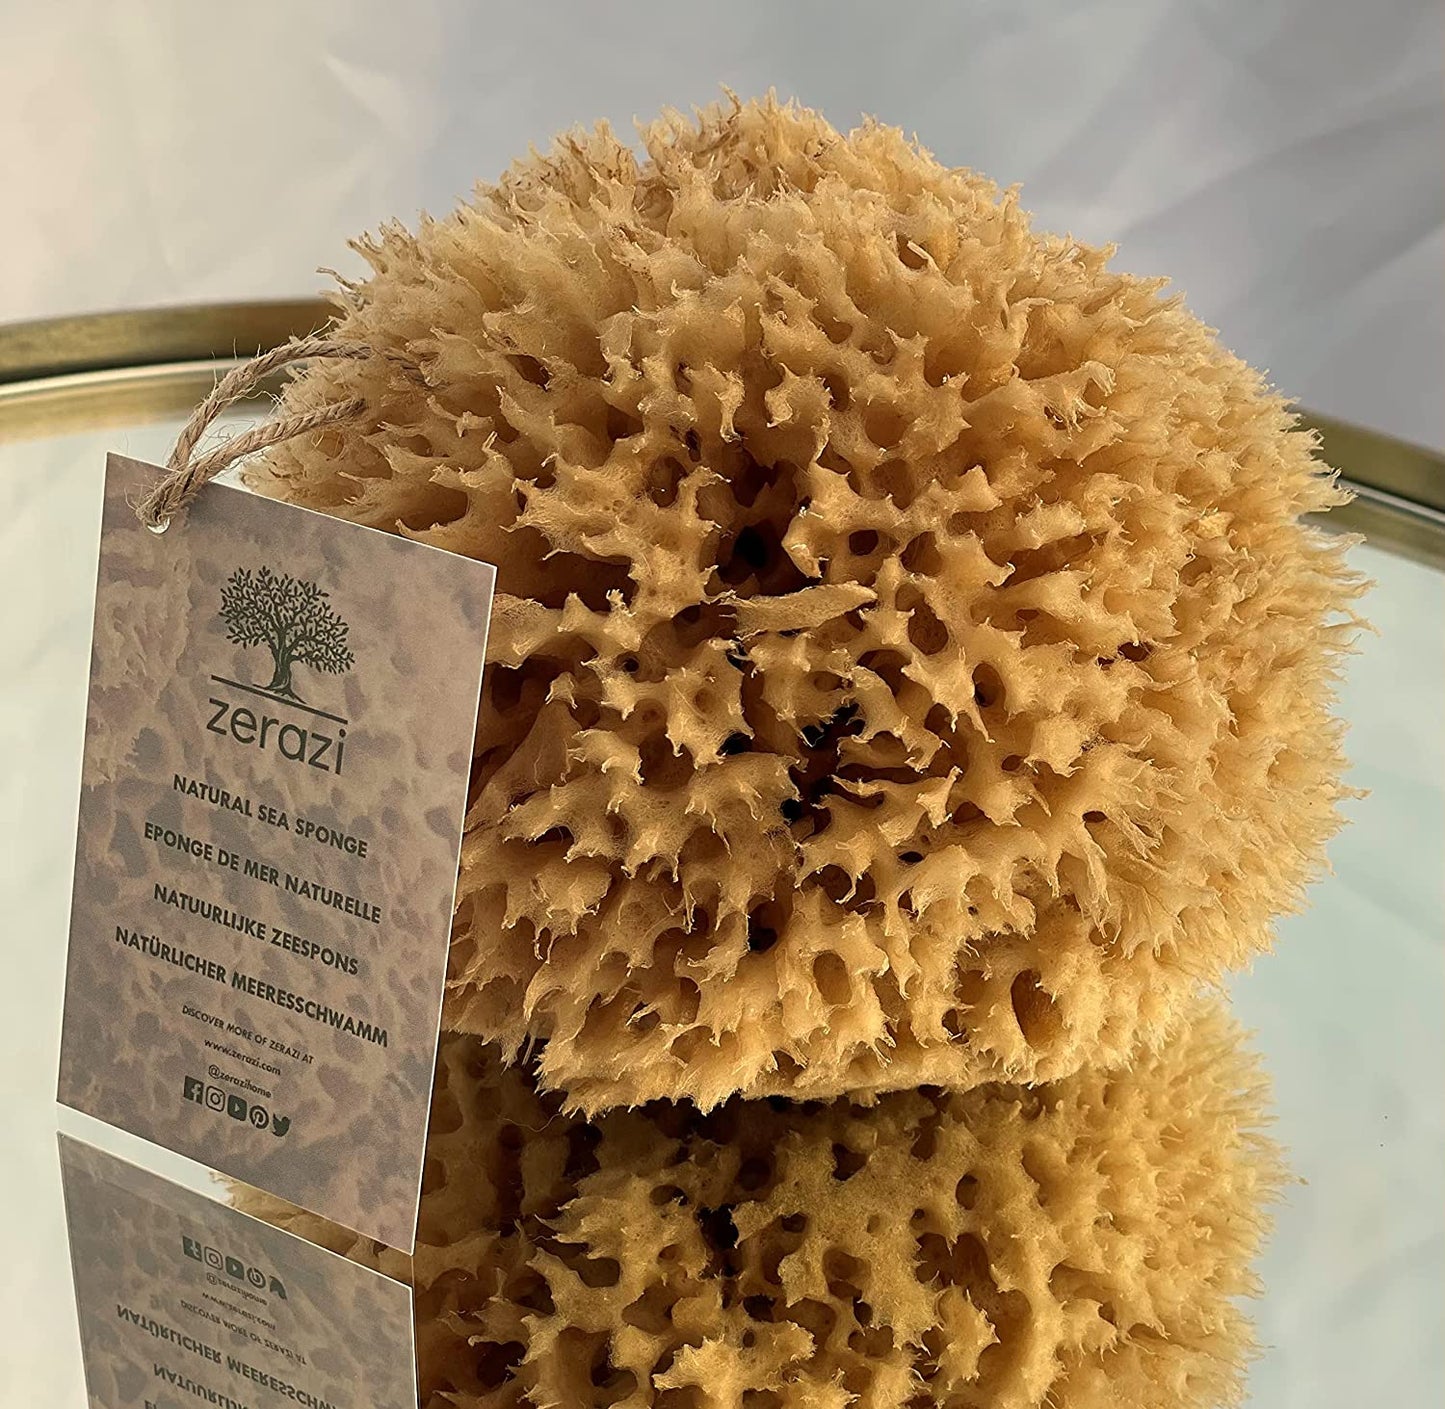 Zerazi | Natural Sea Sponge | 17-18cm | Hygienic | From responsible cultivation, Brown...